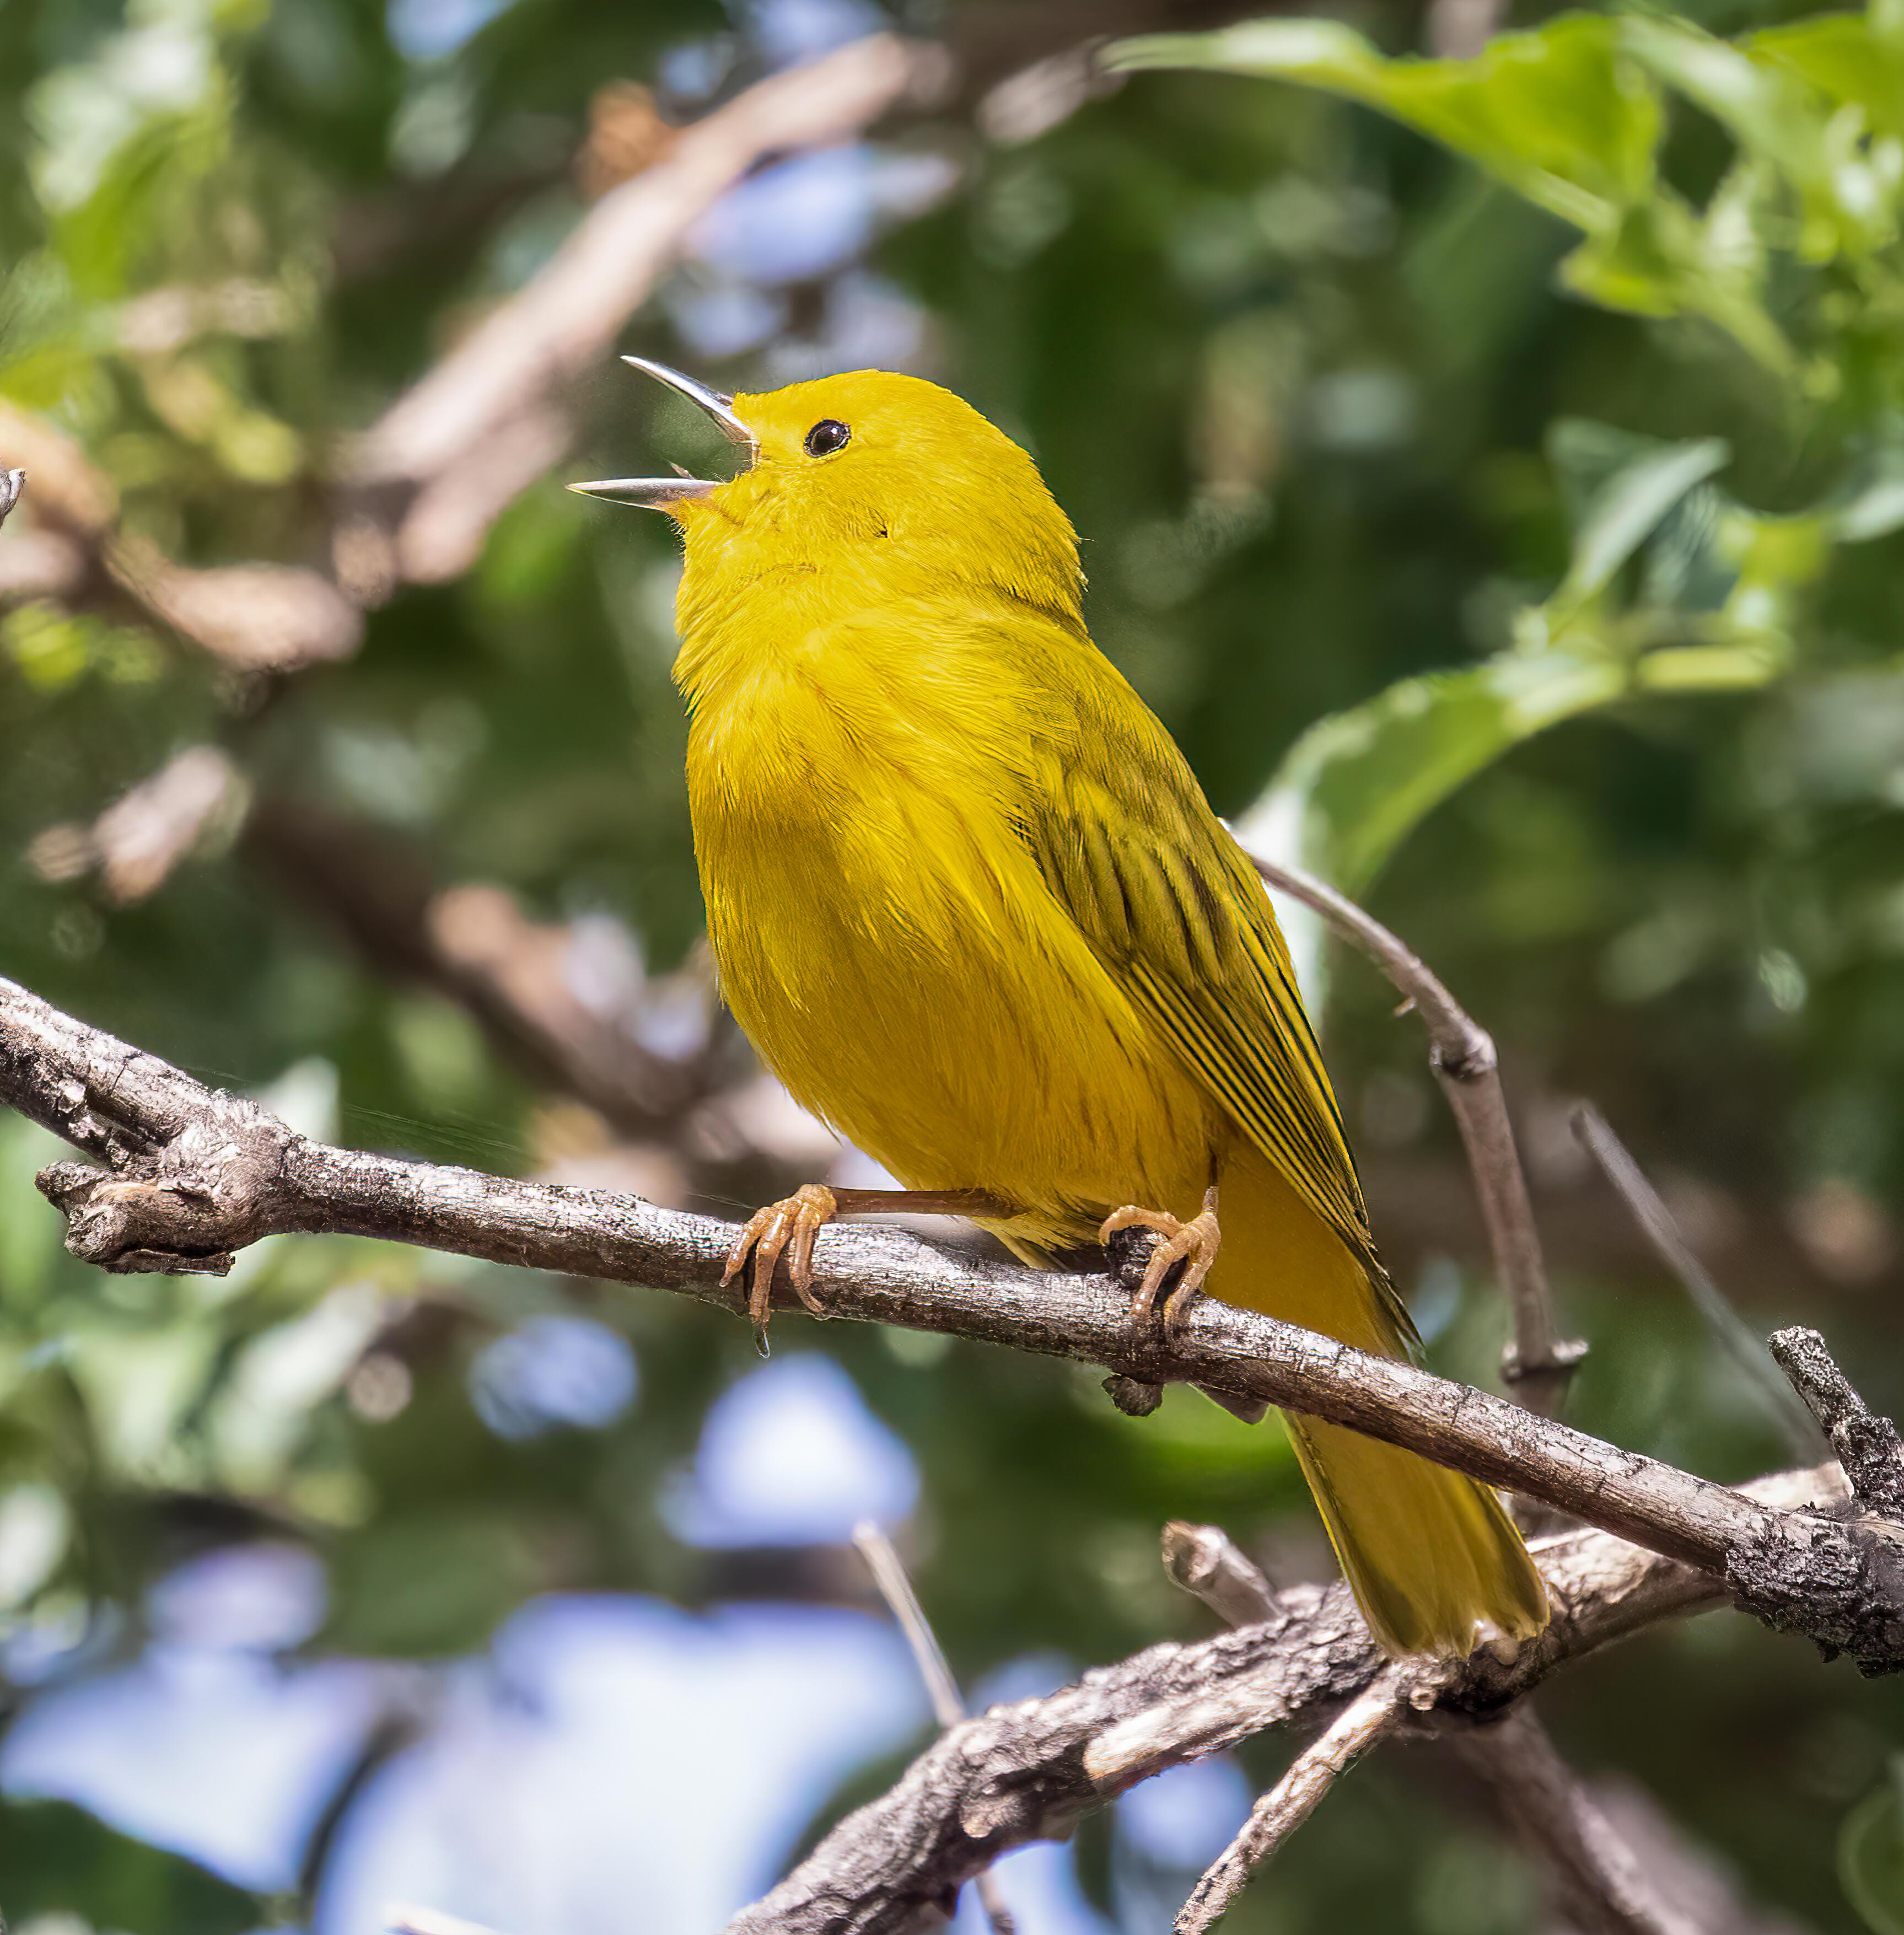 Yellow bird perched on a tree branch with its beak open.